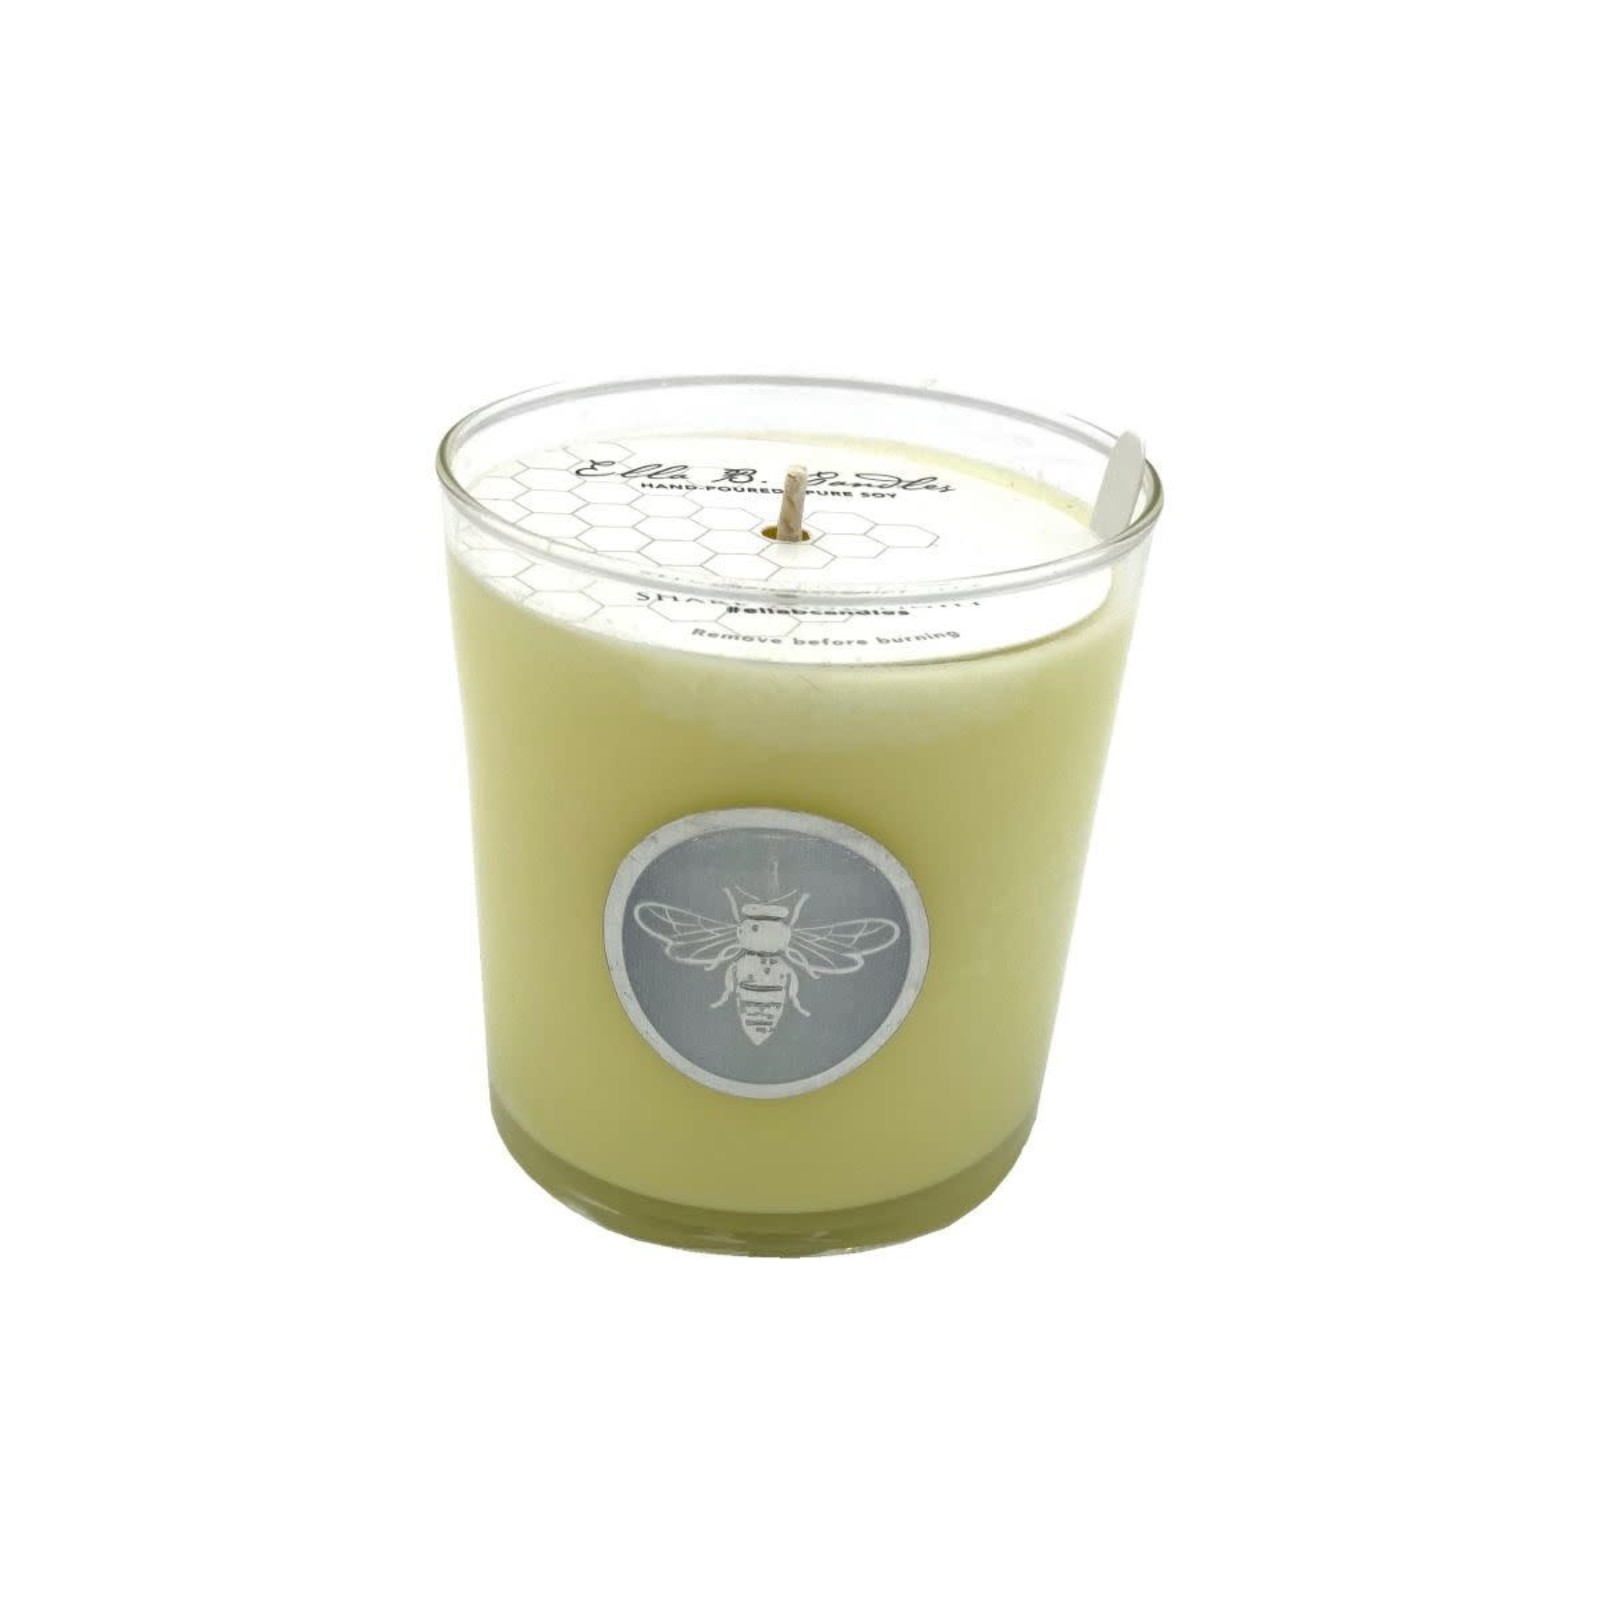 Ella B Candles Hand-Poured Soy Candle-Night at the Opera loading=